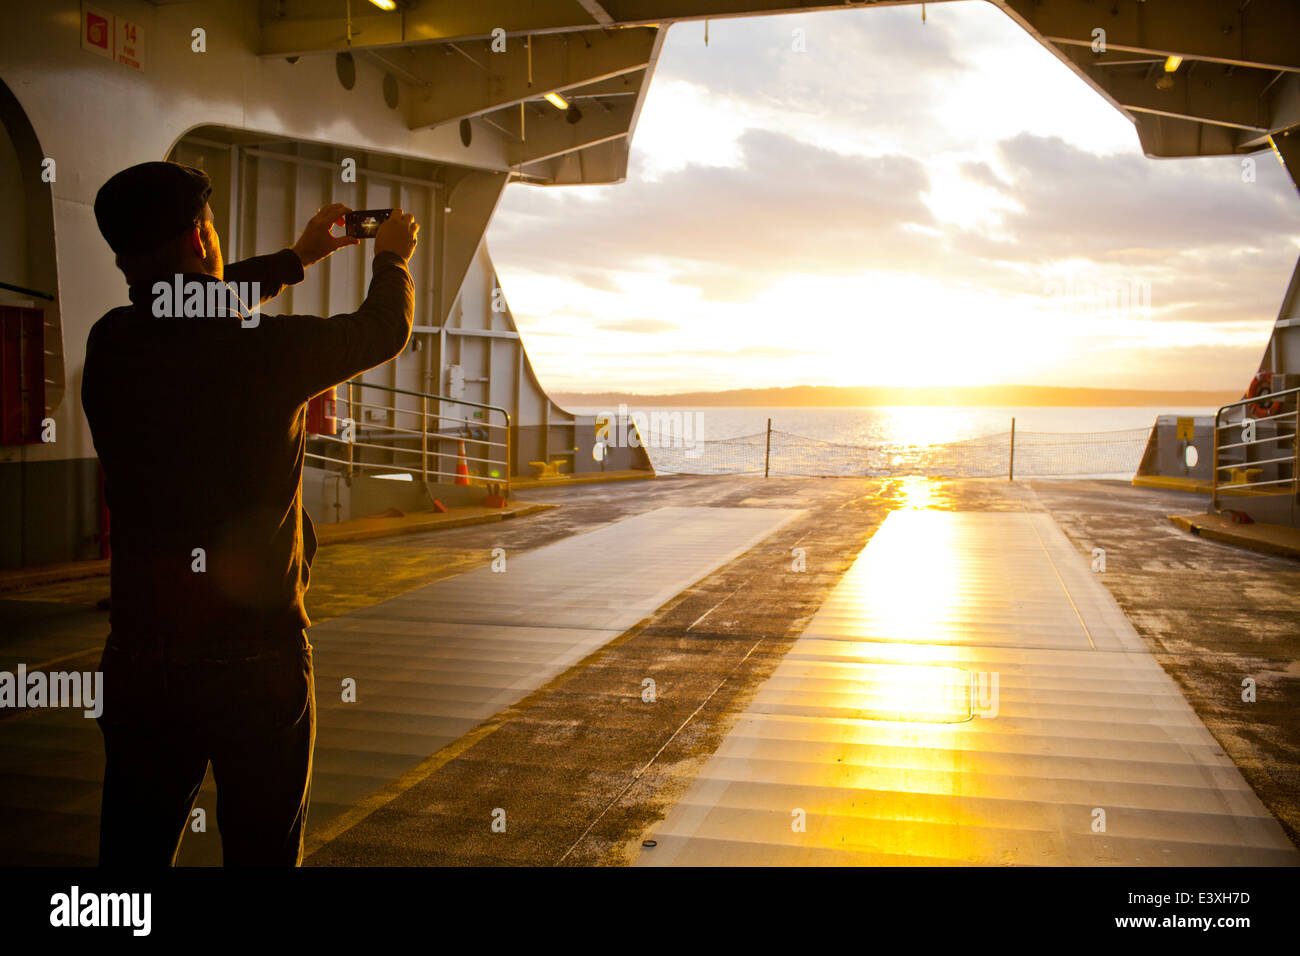 Man taking picture out ferry gate Stock Photo